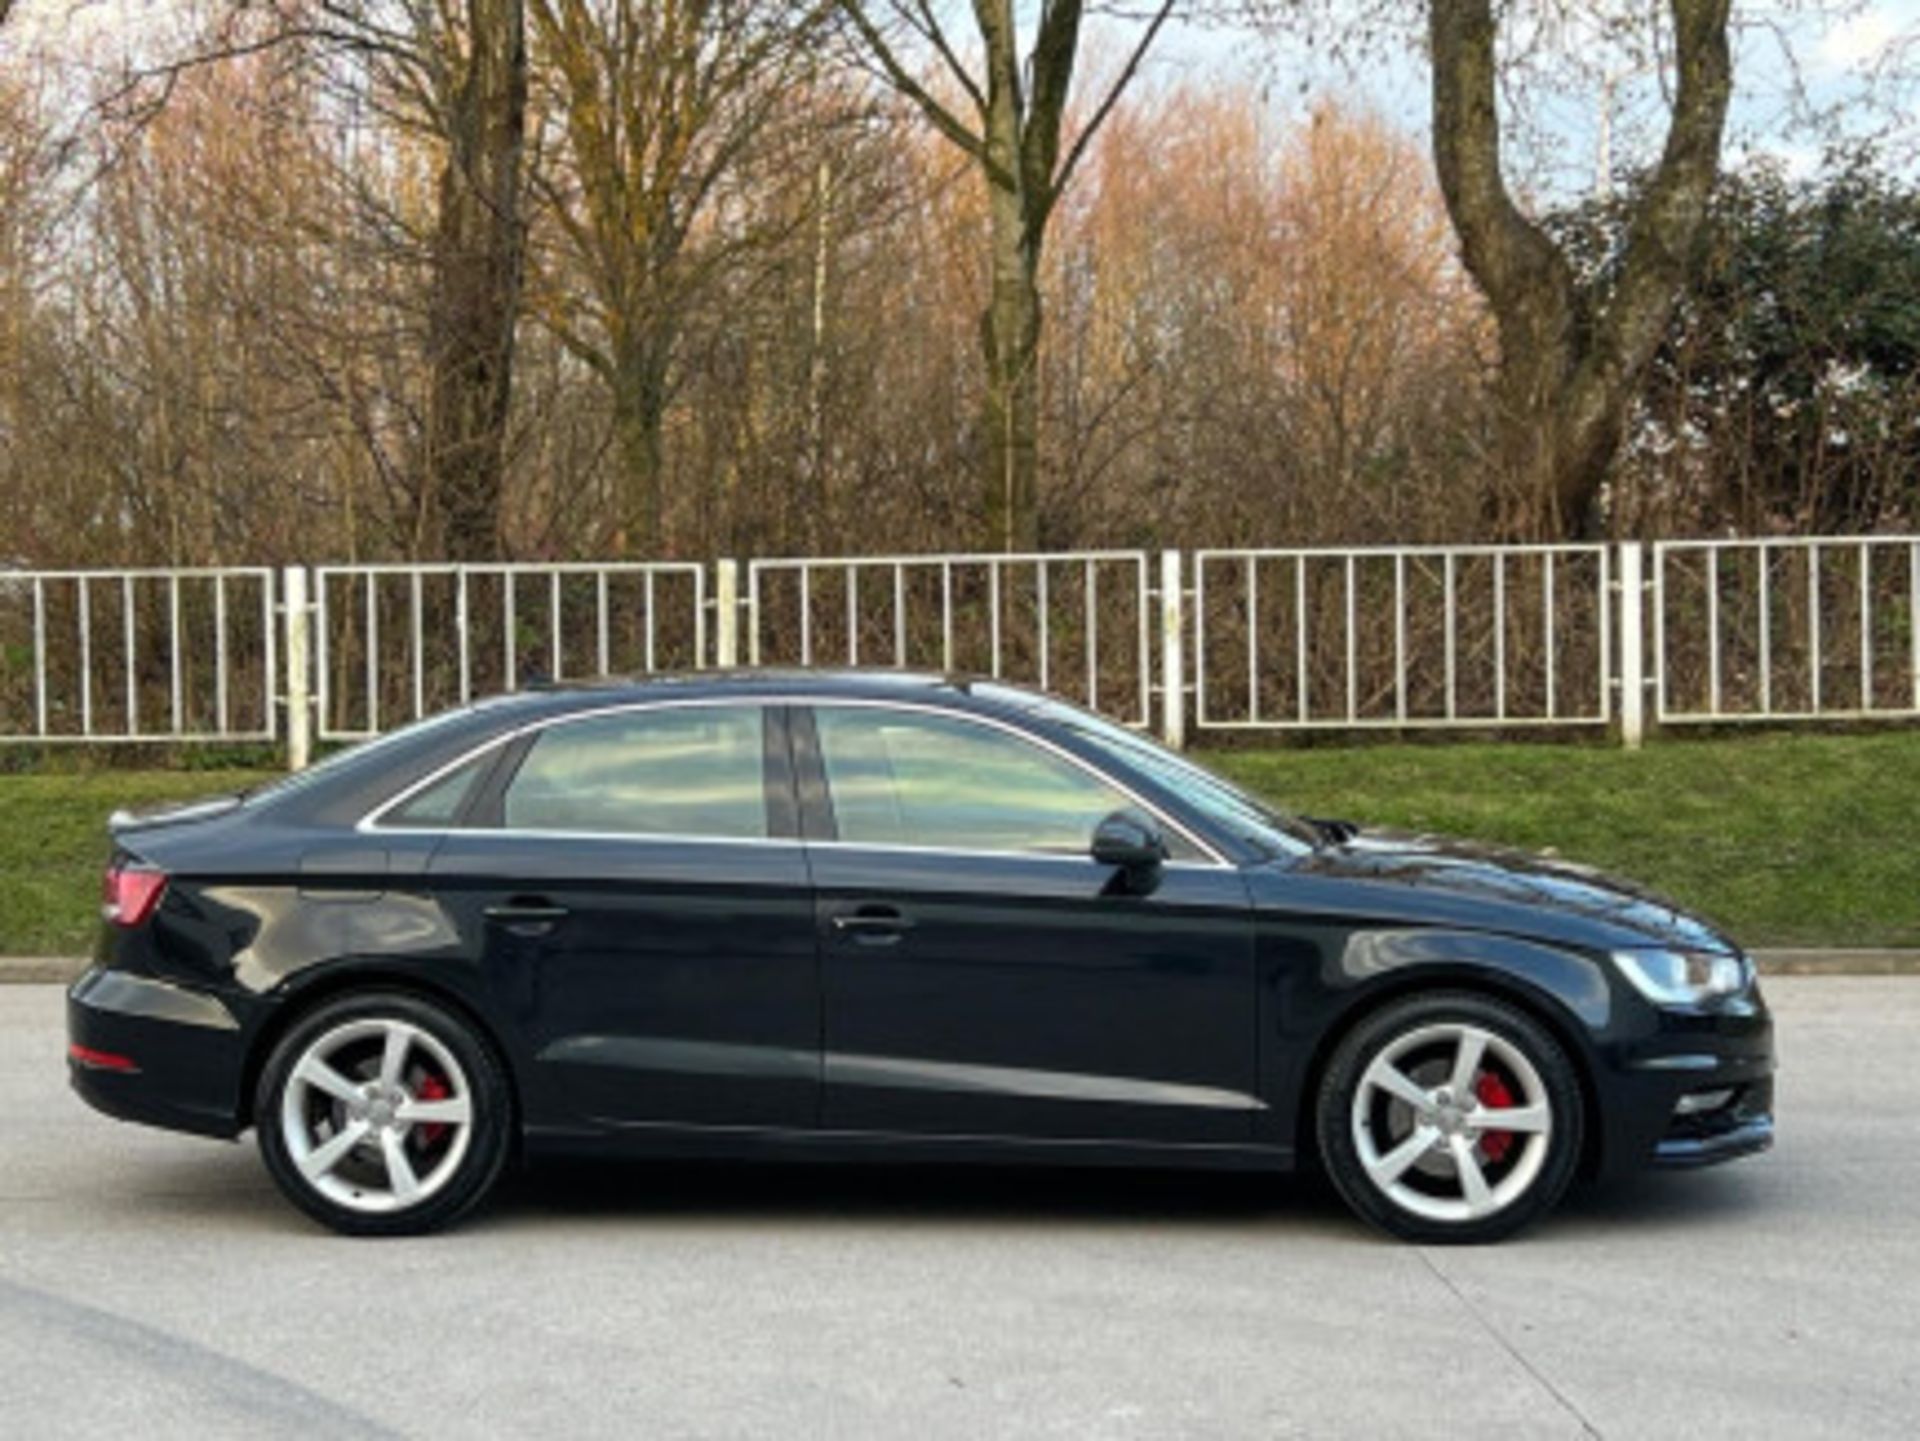 AUDI A3 2.0TDI SPORTBACK - STYLE, PERFORMANCE, AND COMFORT COMBINED >>--NO VAT ON HAMMER--<< - Image 77 of 216